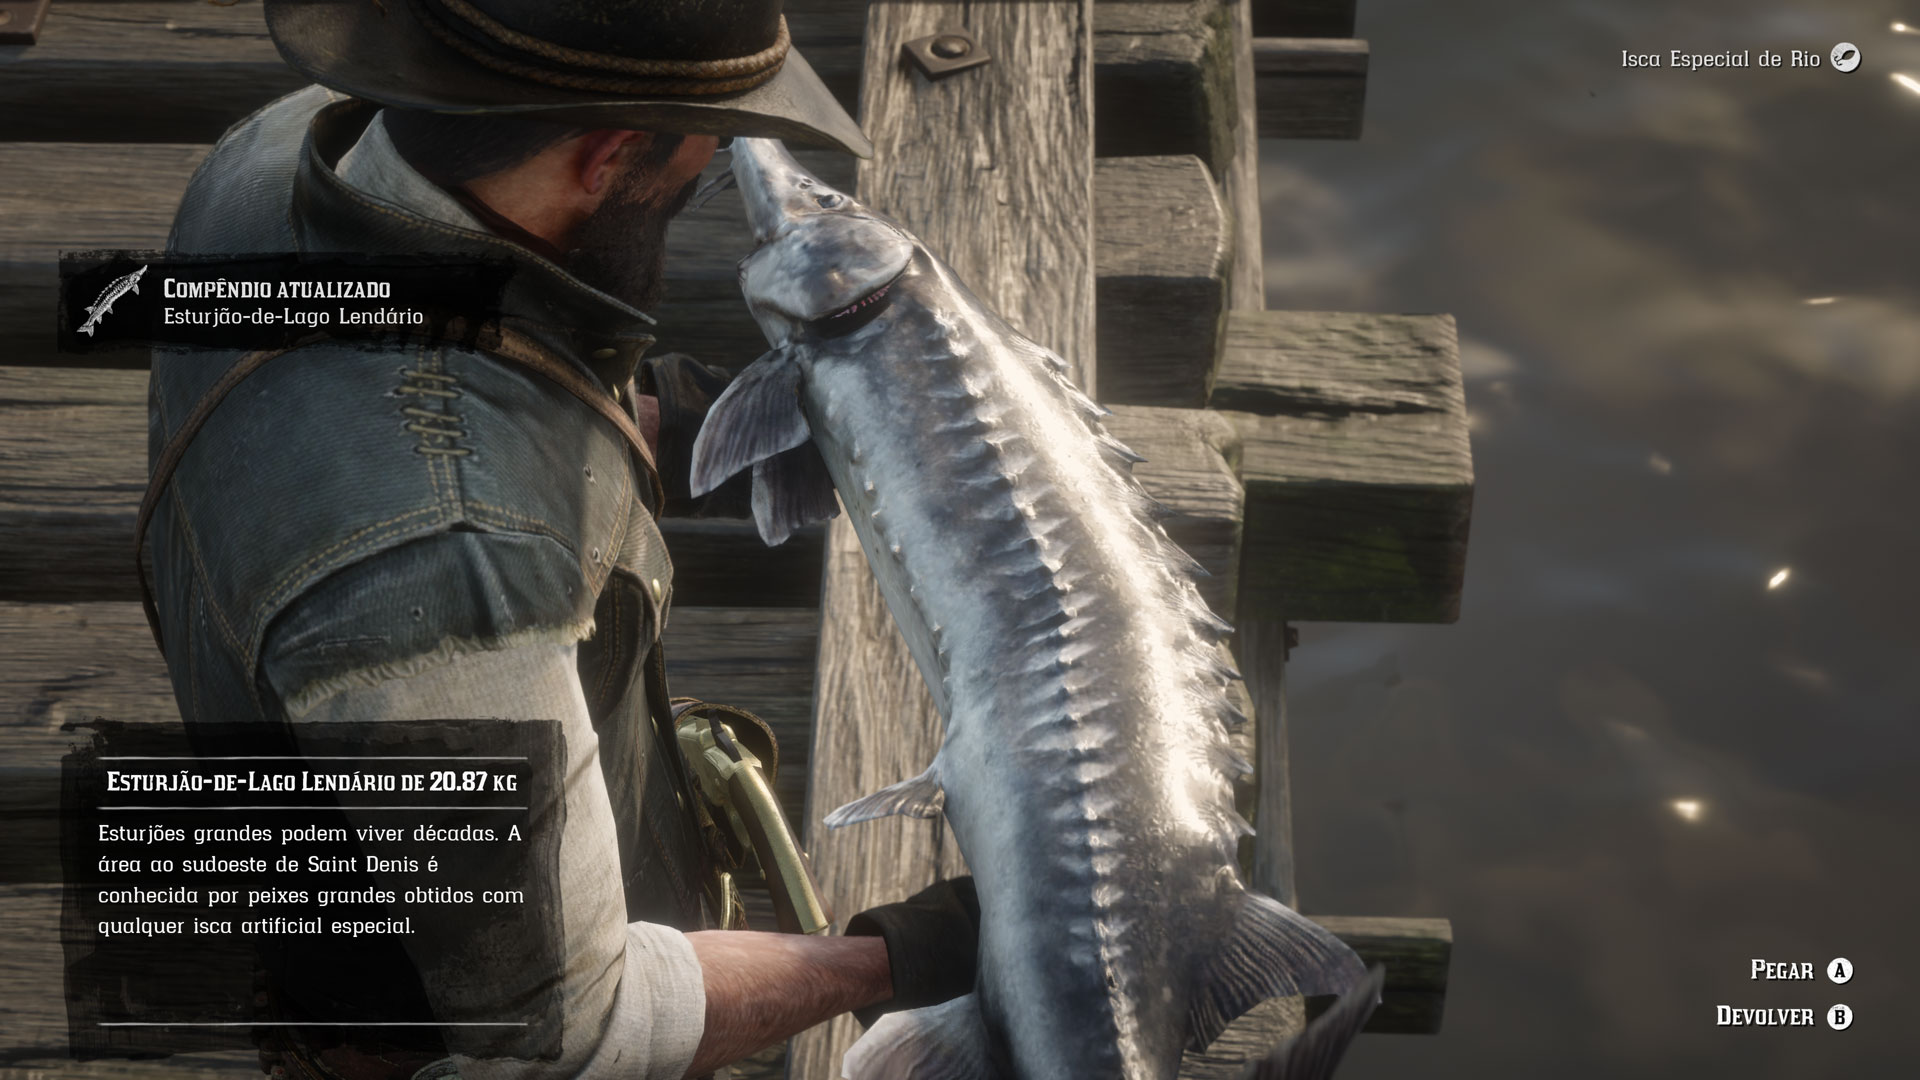 red dead redemption 2 catch legendary fish return to shore takes me to island